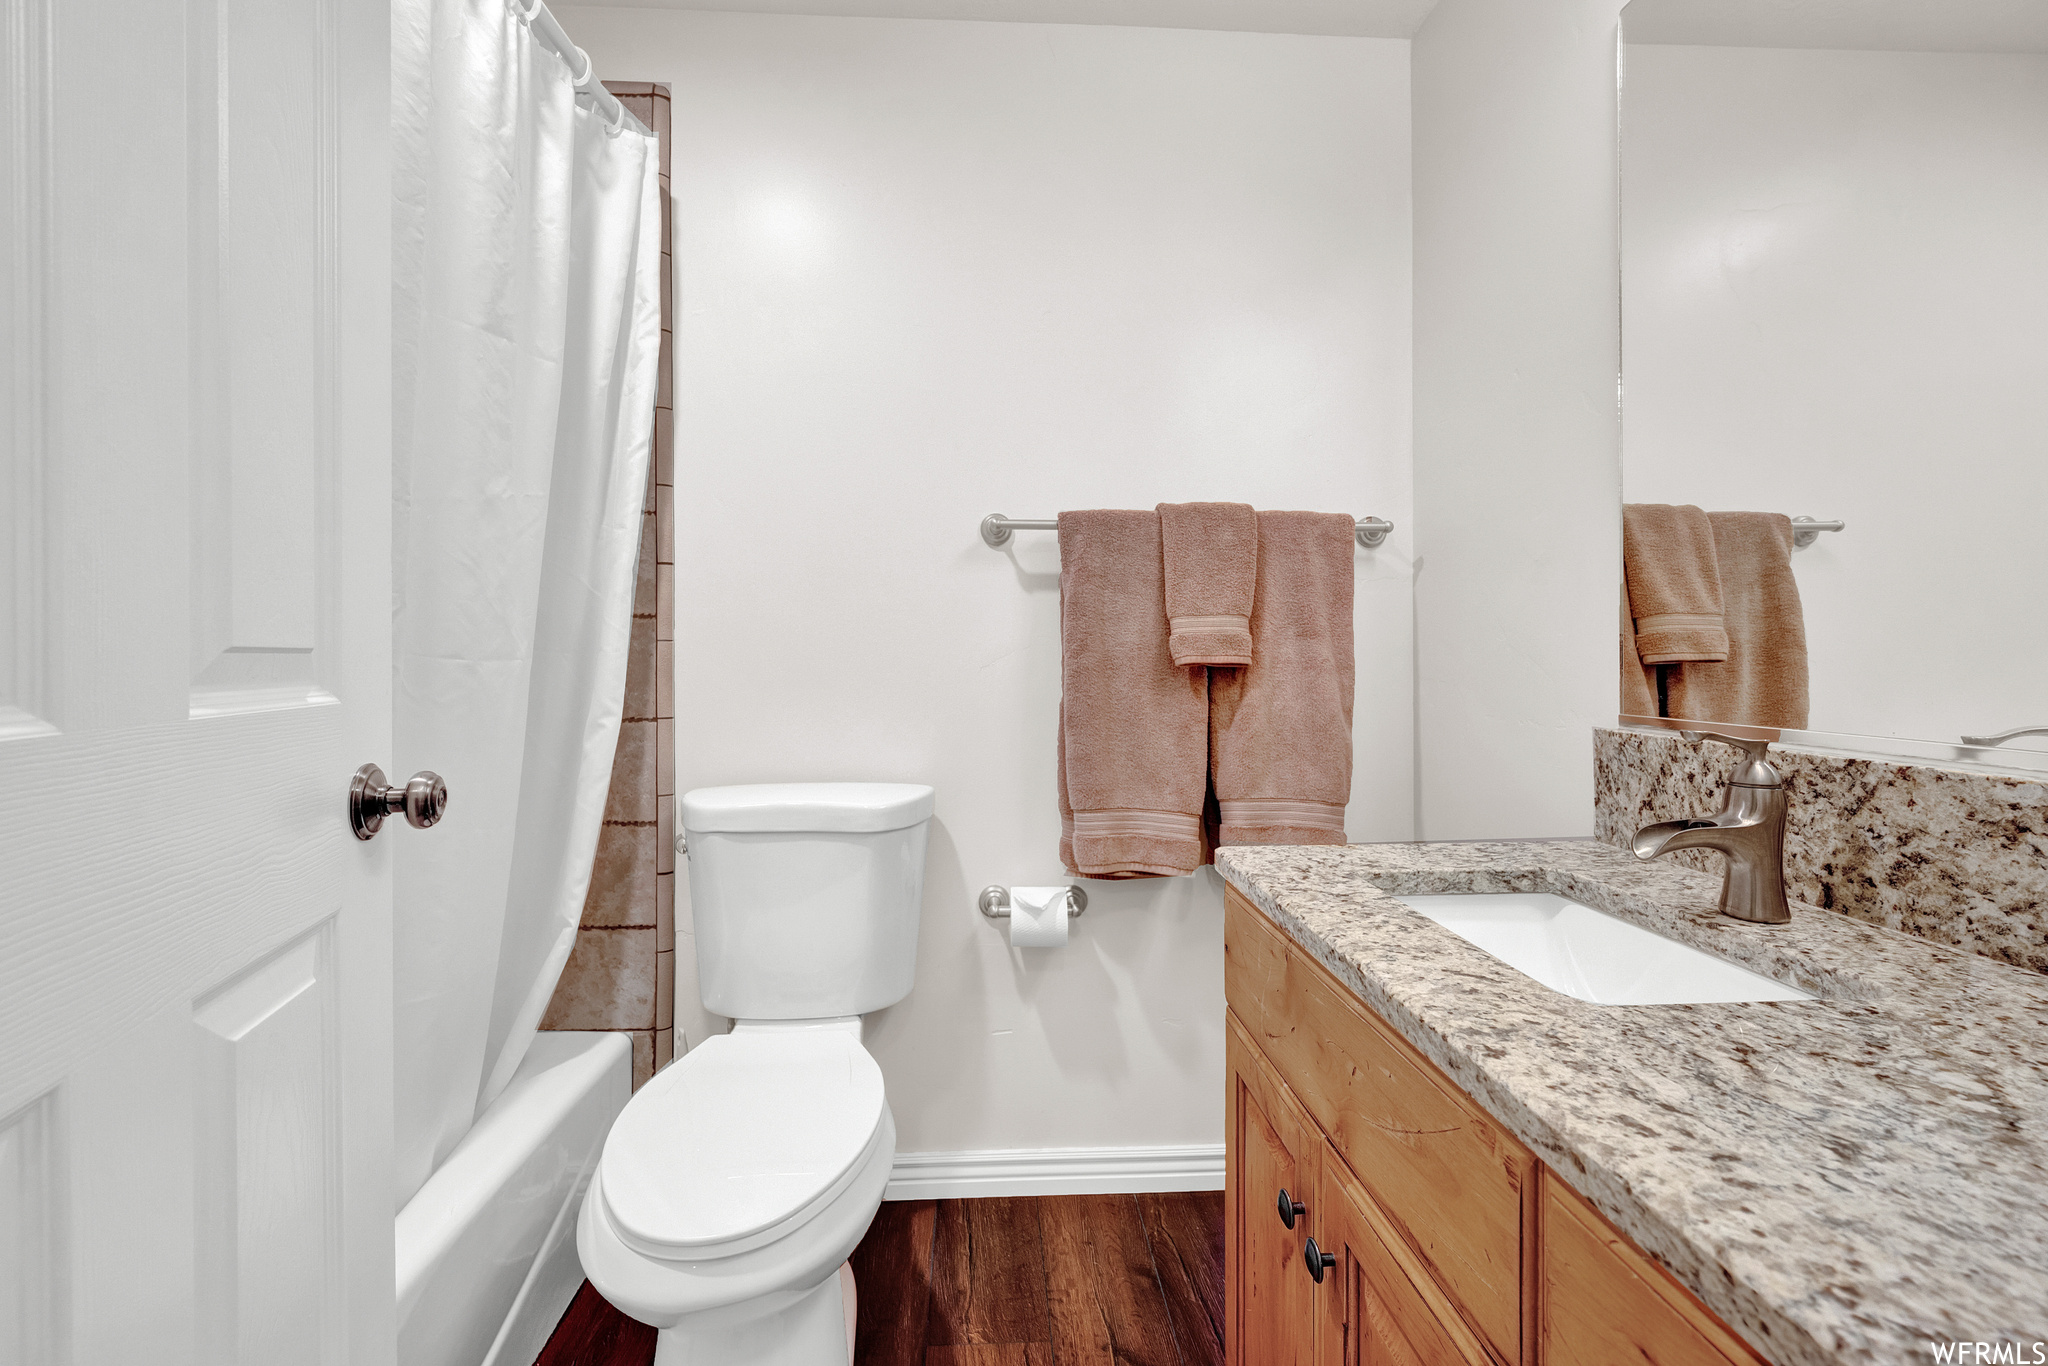 Level 2 Bathroom: Full bathroom featuring hardwood floors, shower curtain, vanity with extensive cabinet space, bathtub / shower combination, mirror, and toilet